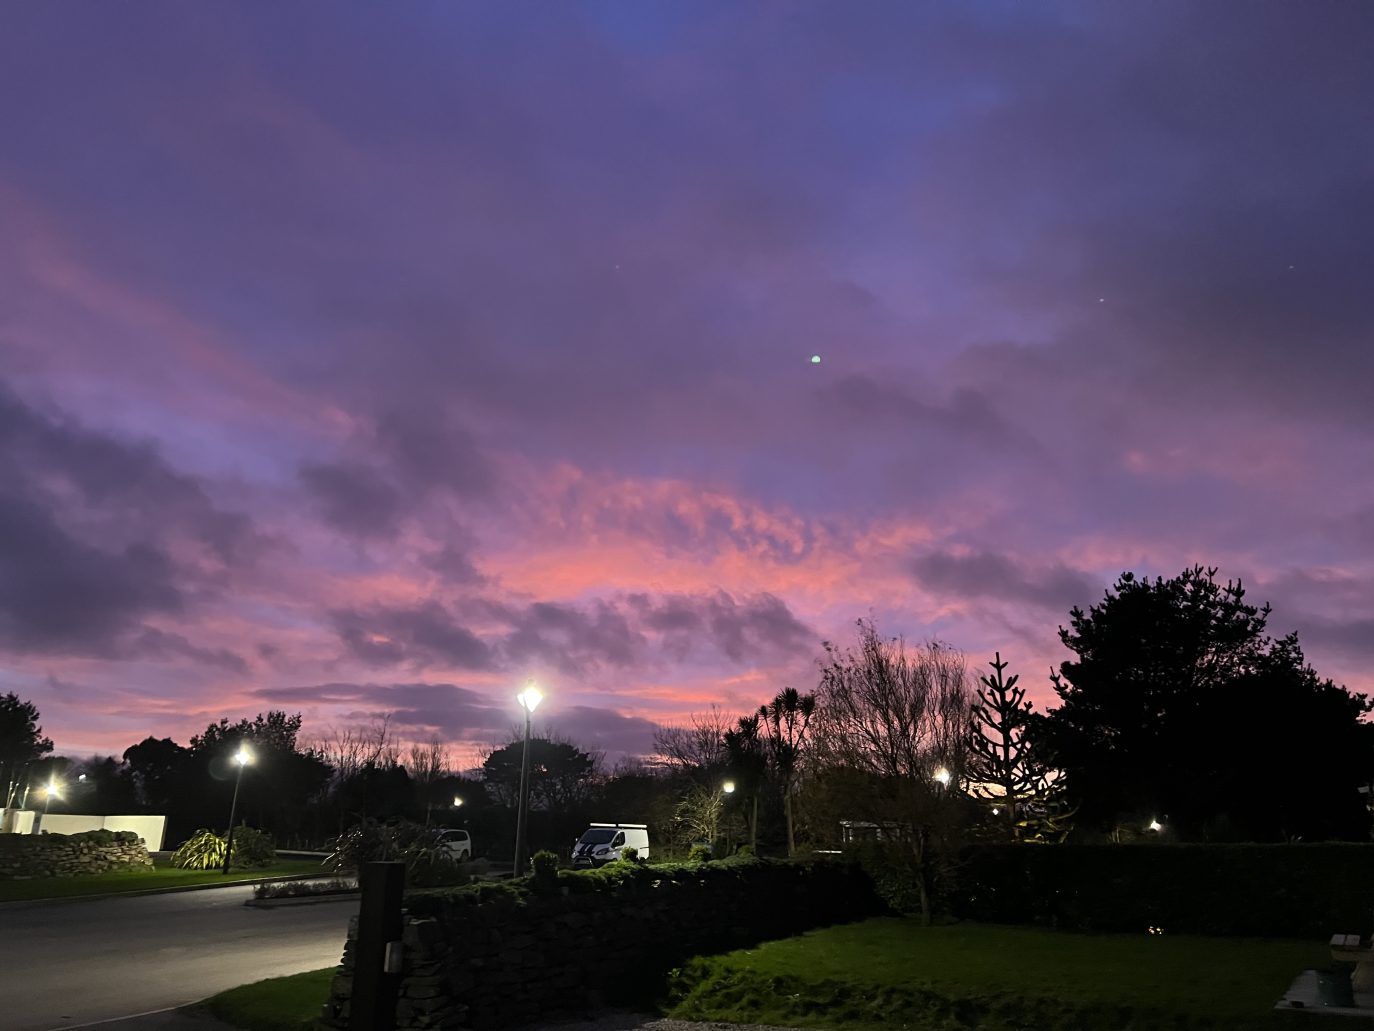 A dramatic sunset with vibrant purple and pink clouds over a suburban landscape featuring trees, monkey tree, and streetlights.